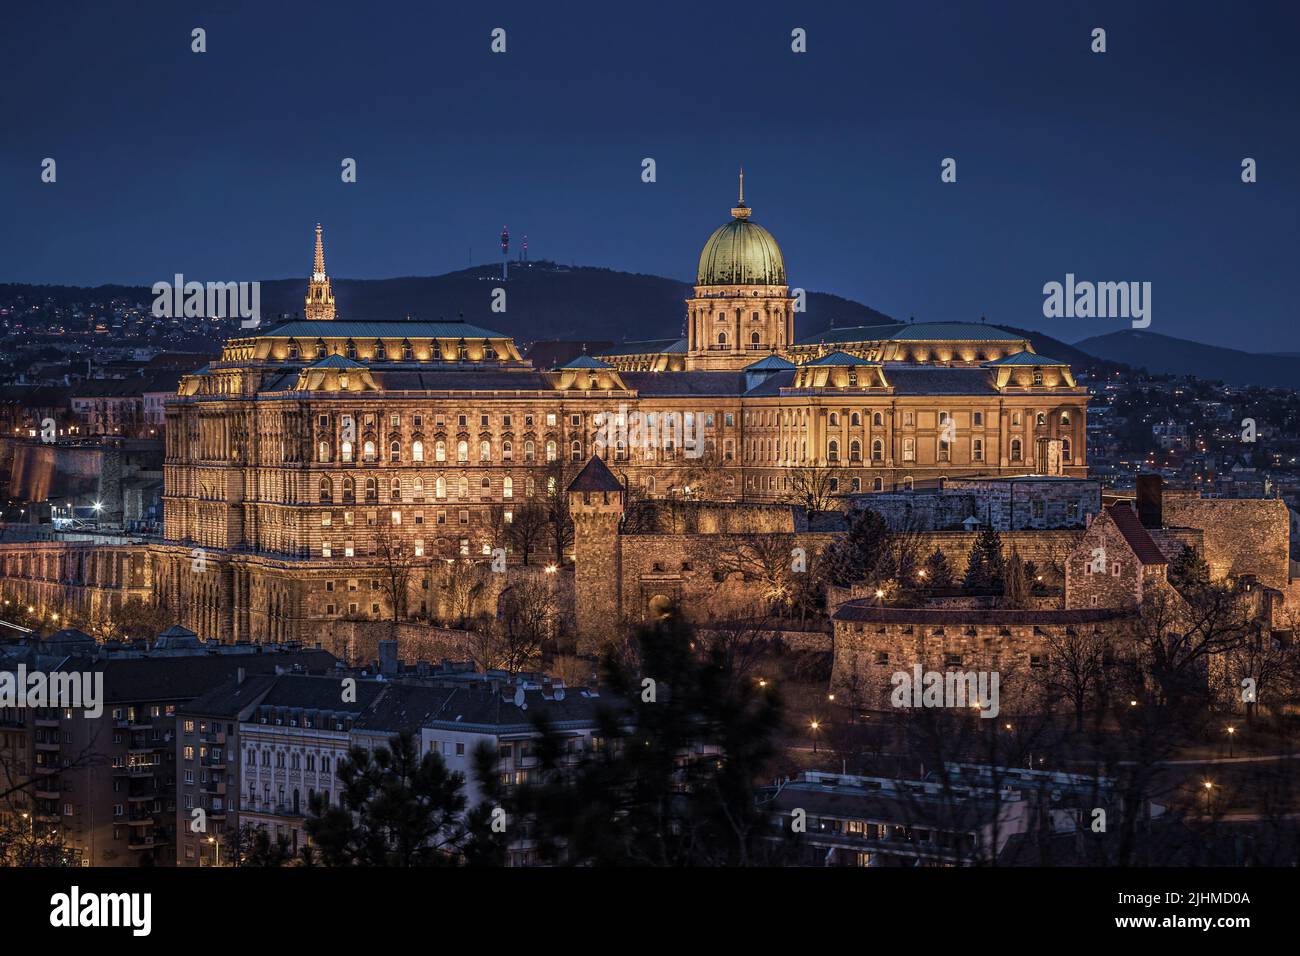 Budapest, Hungary - The beautiful Buda Castle (Royal Palace) as seen from Gellert Hill illuminated in winter time at blue hour Stock Photo